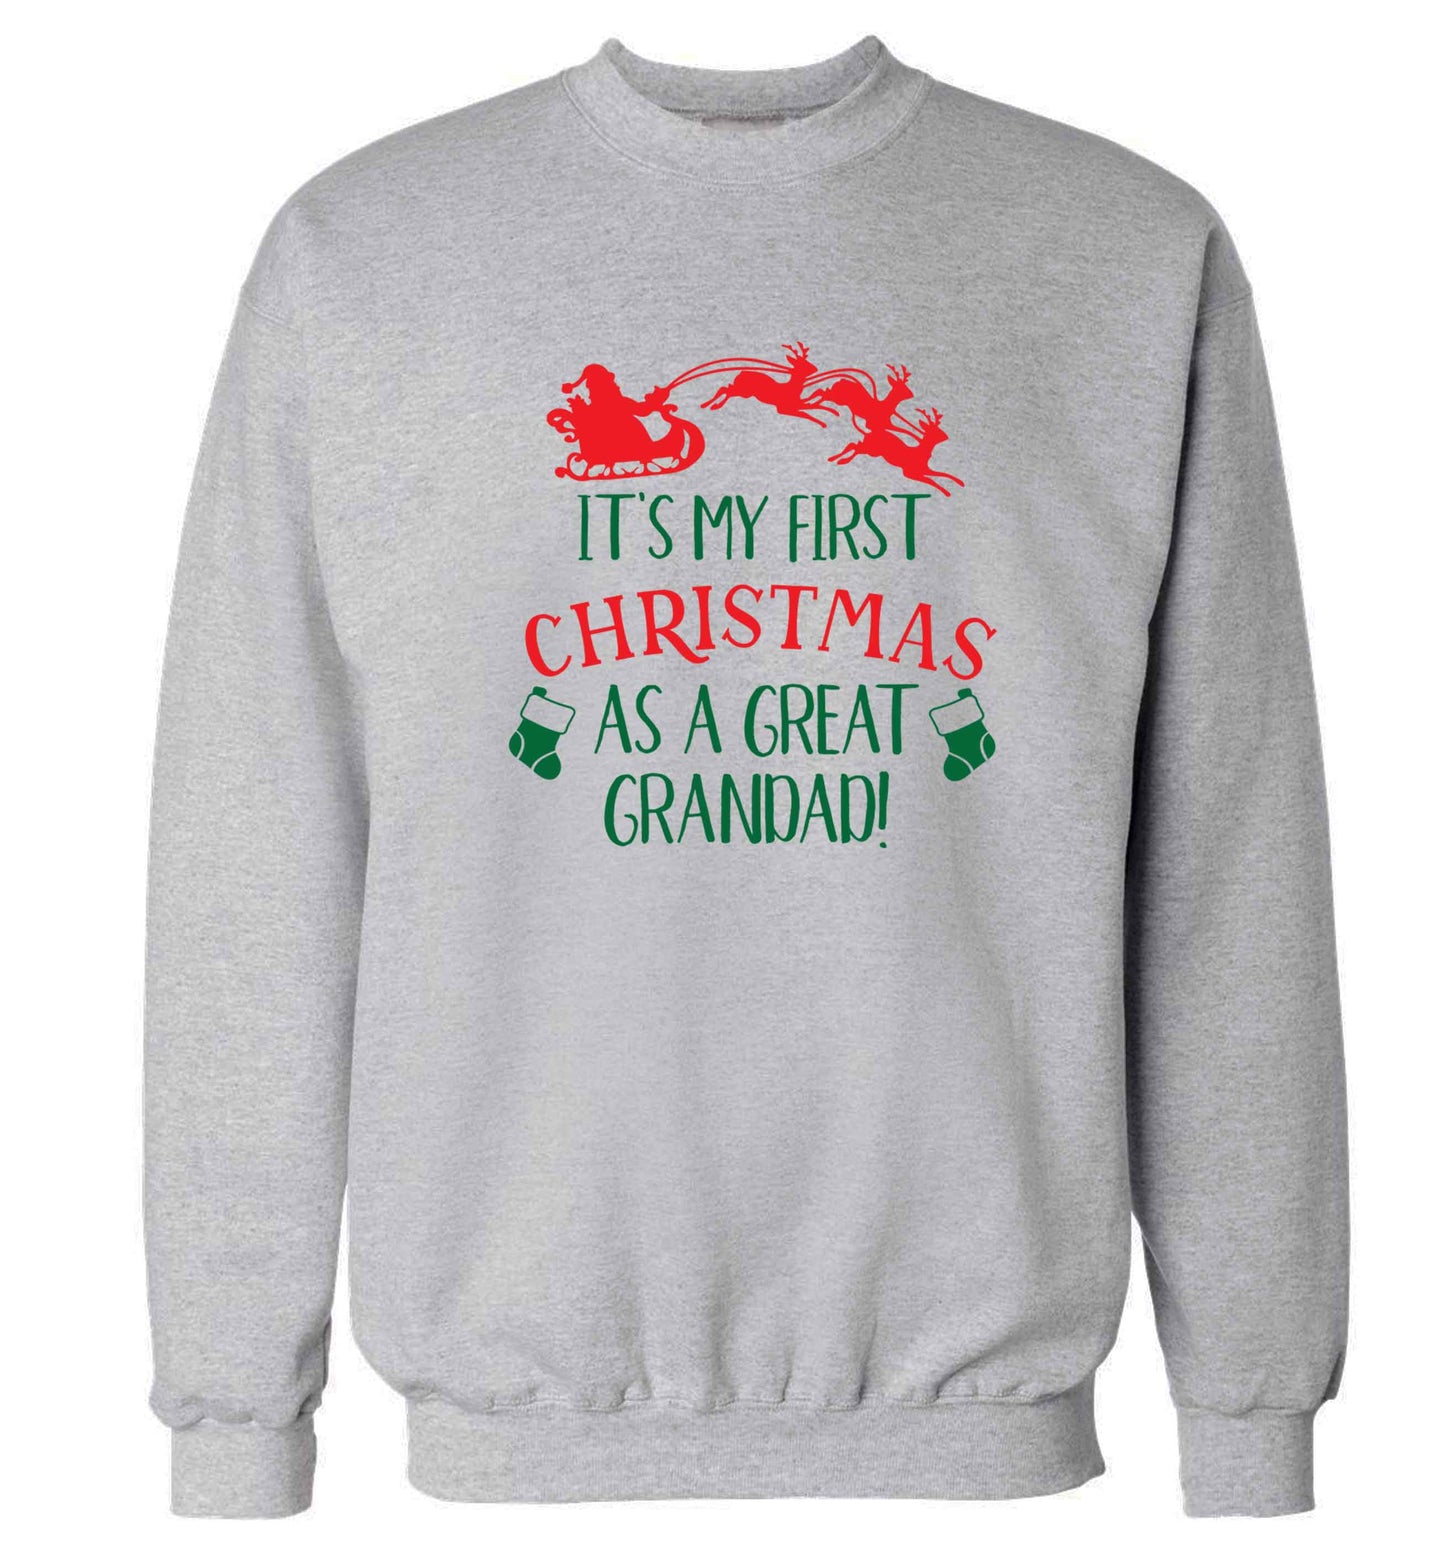 It's my first Christmas as a great grandad! Adult's unisex grey Sweater 2XL